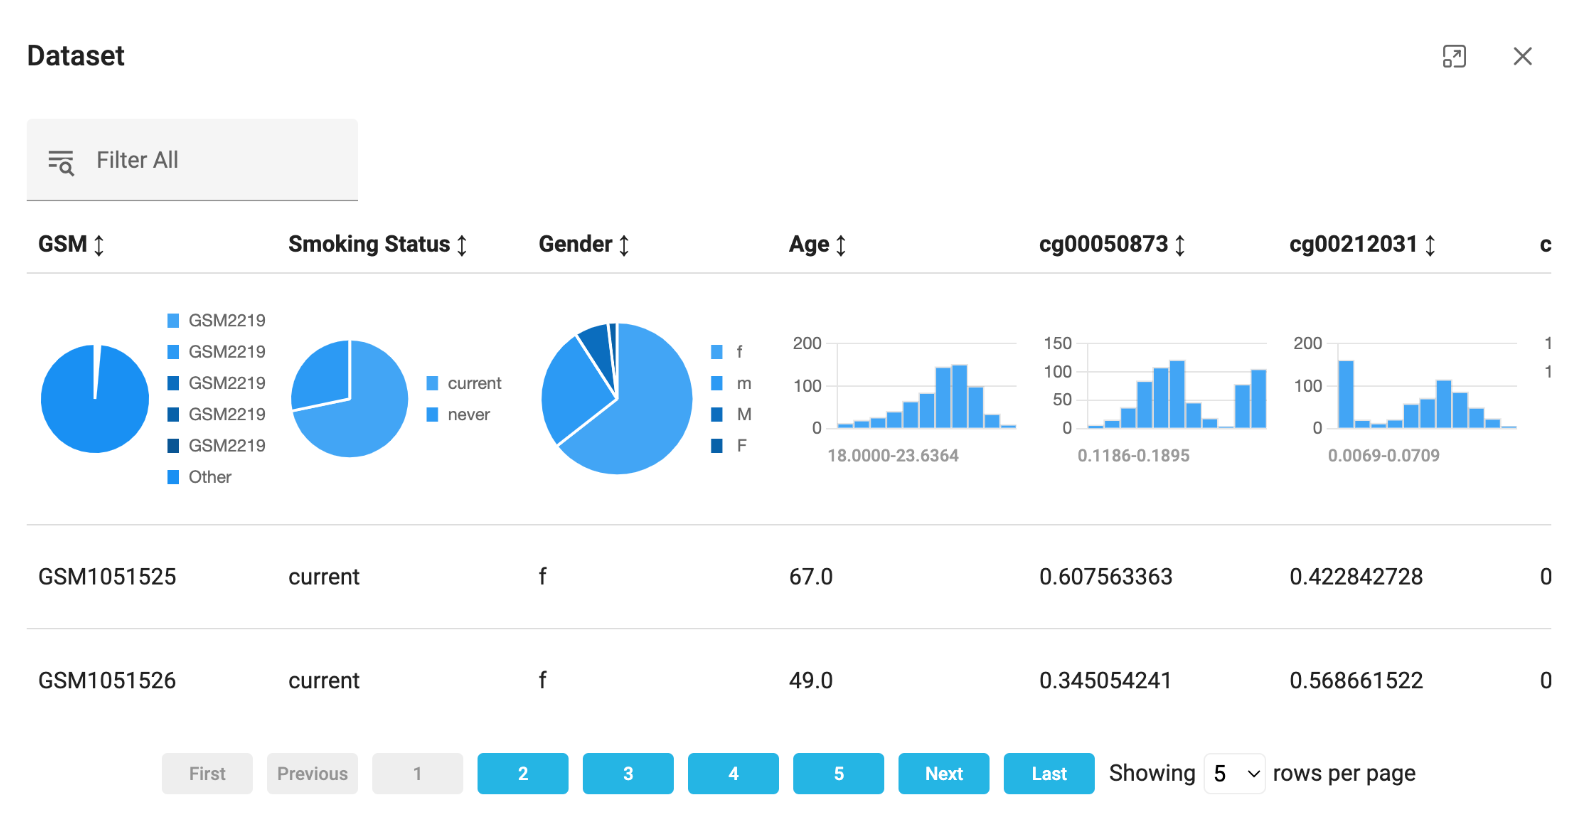 A dashboard showing how the data is distributed.